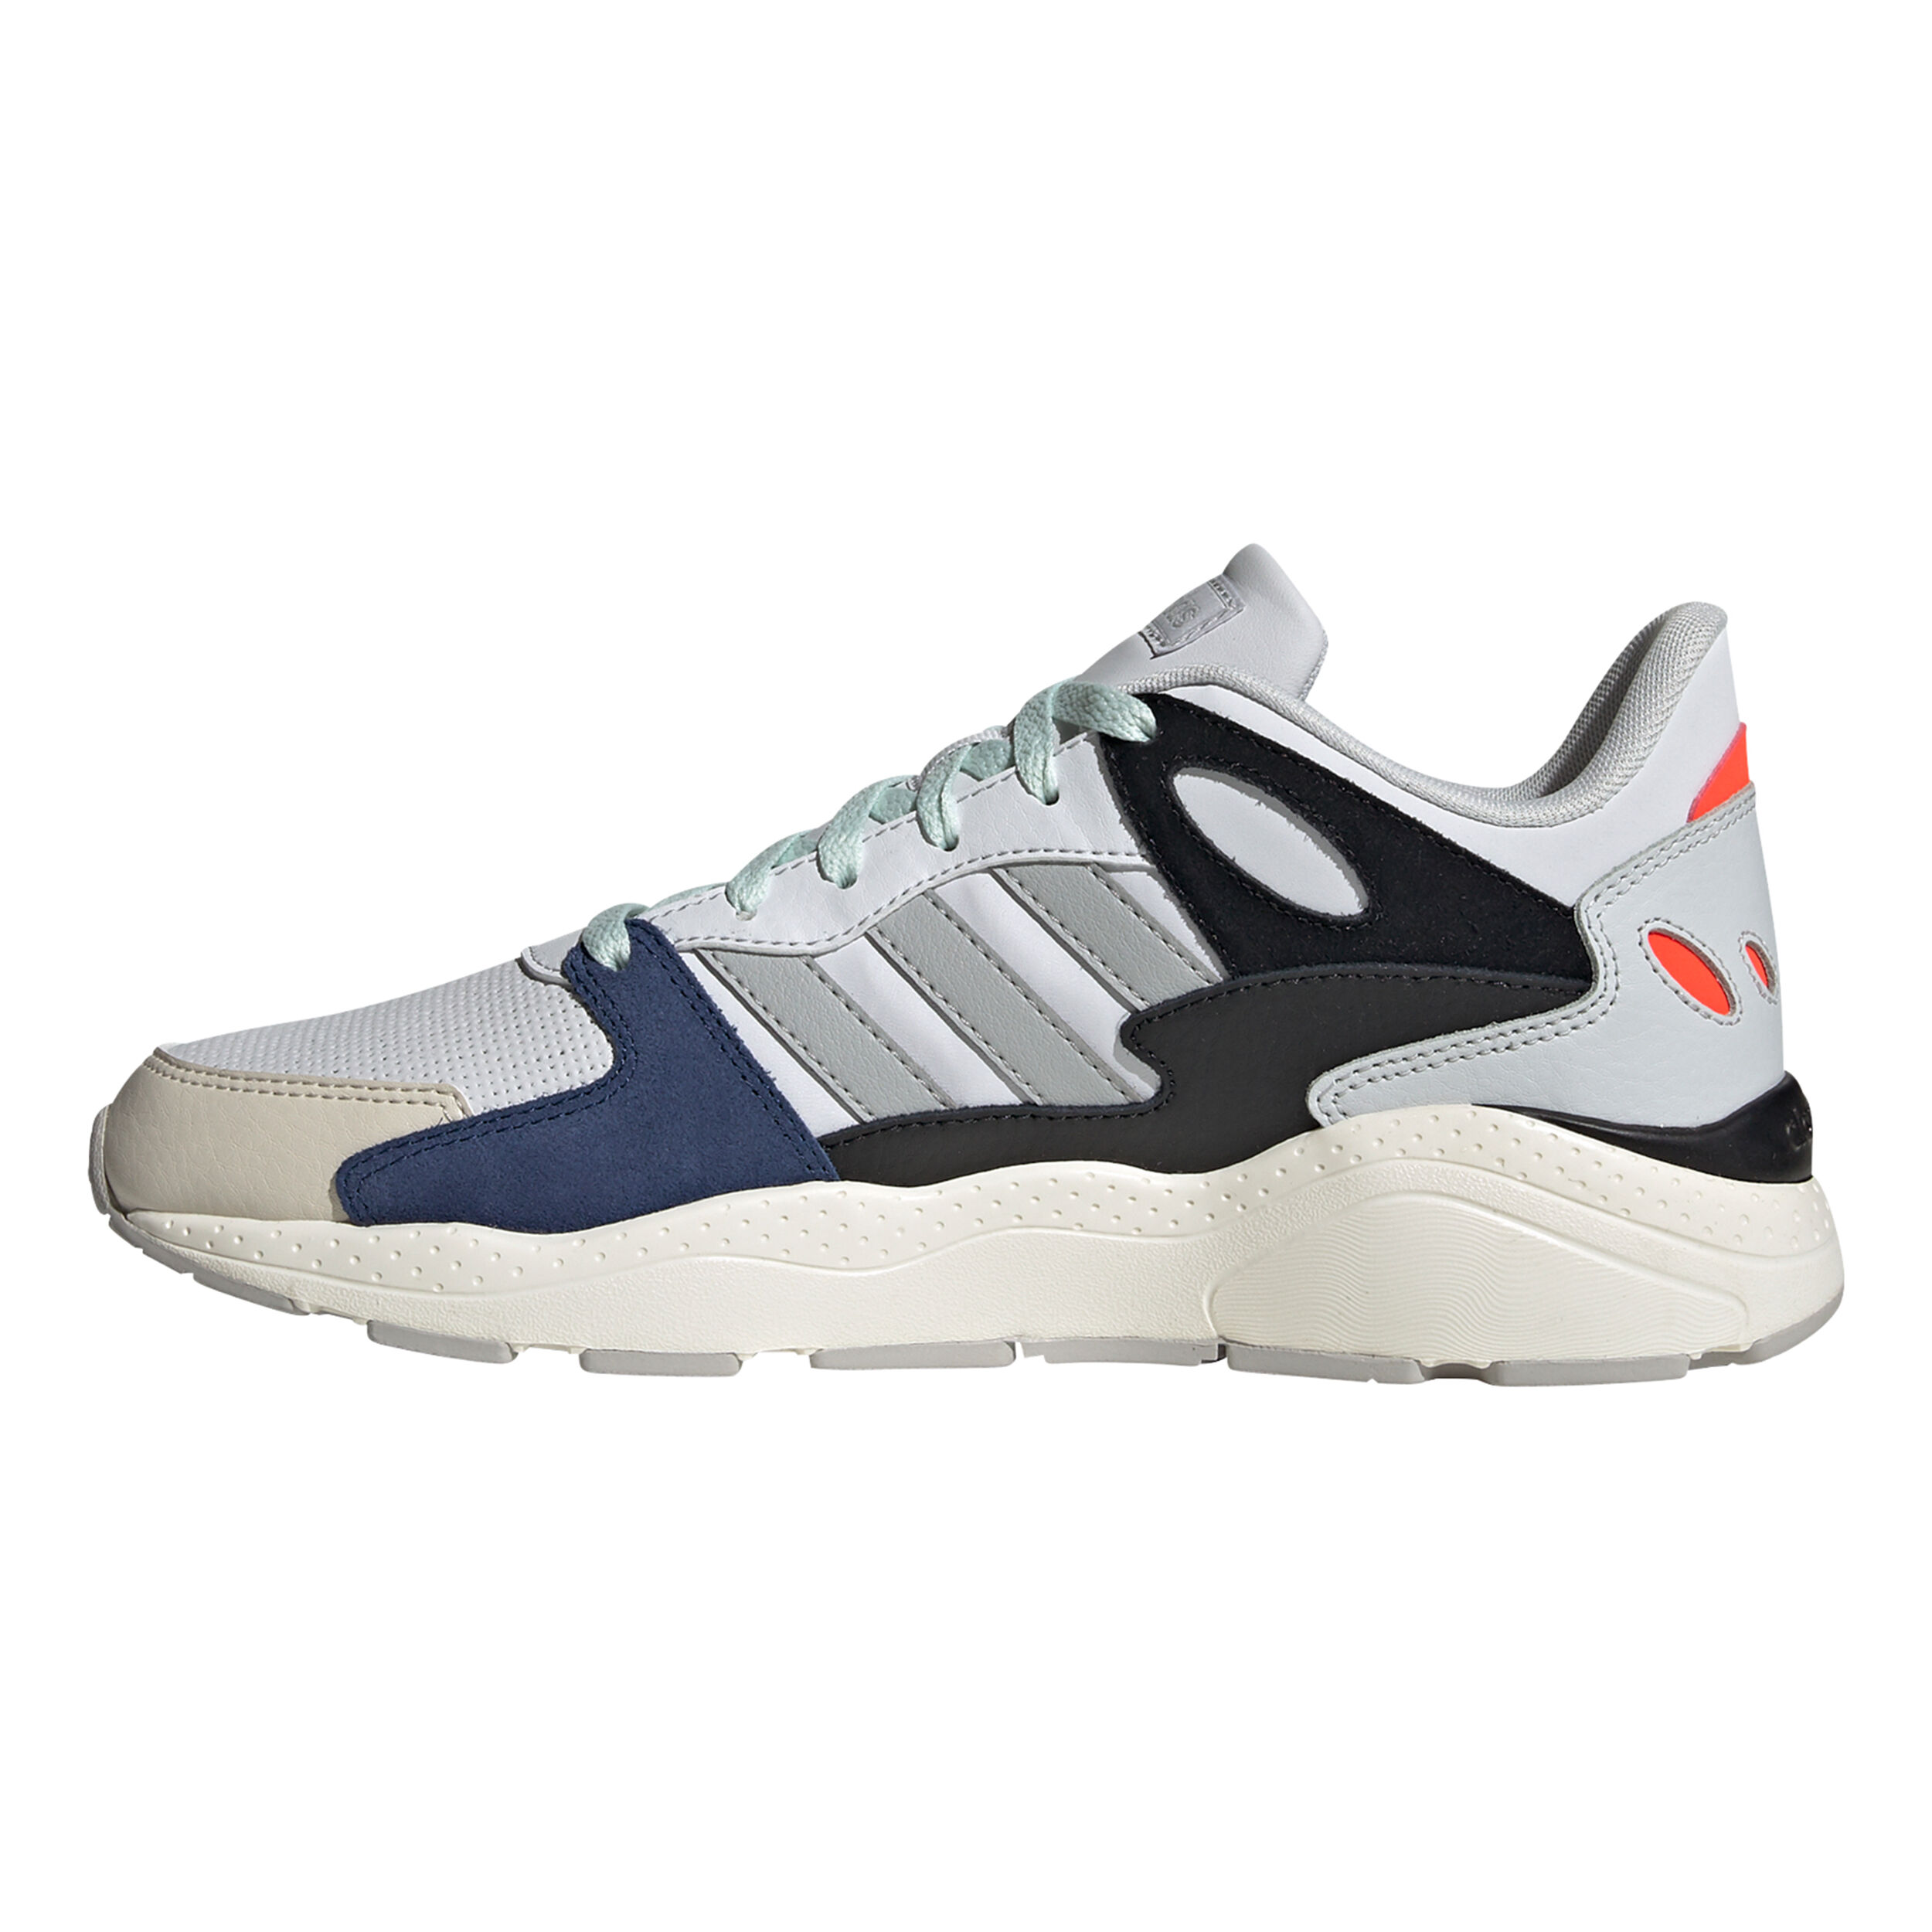 adidas chaos mens trainers